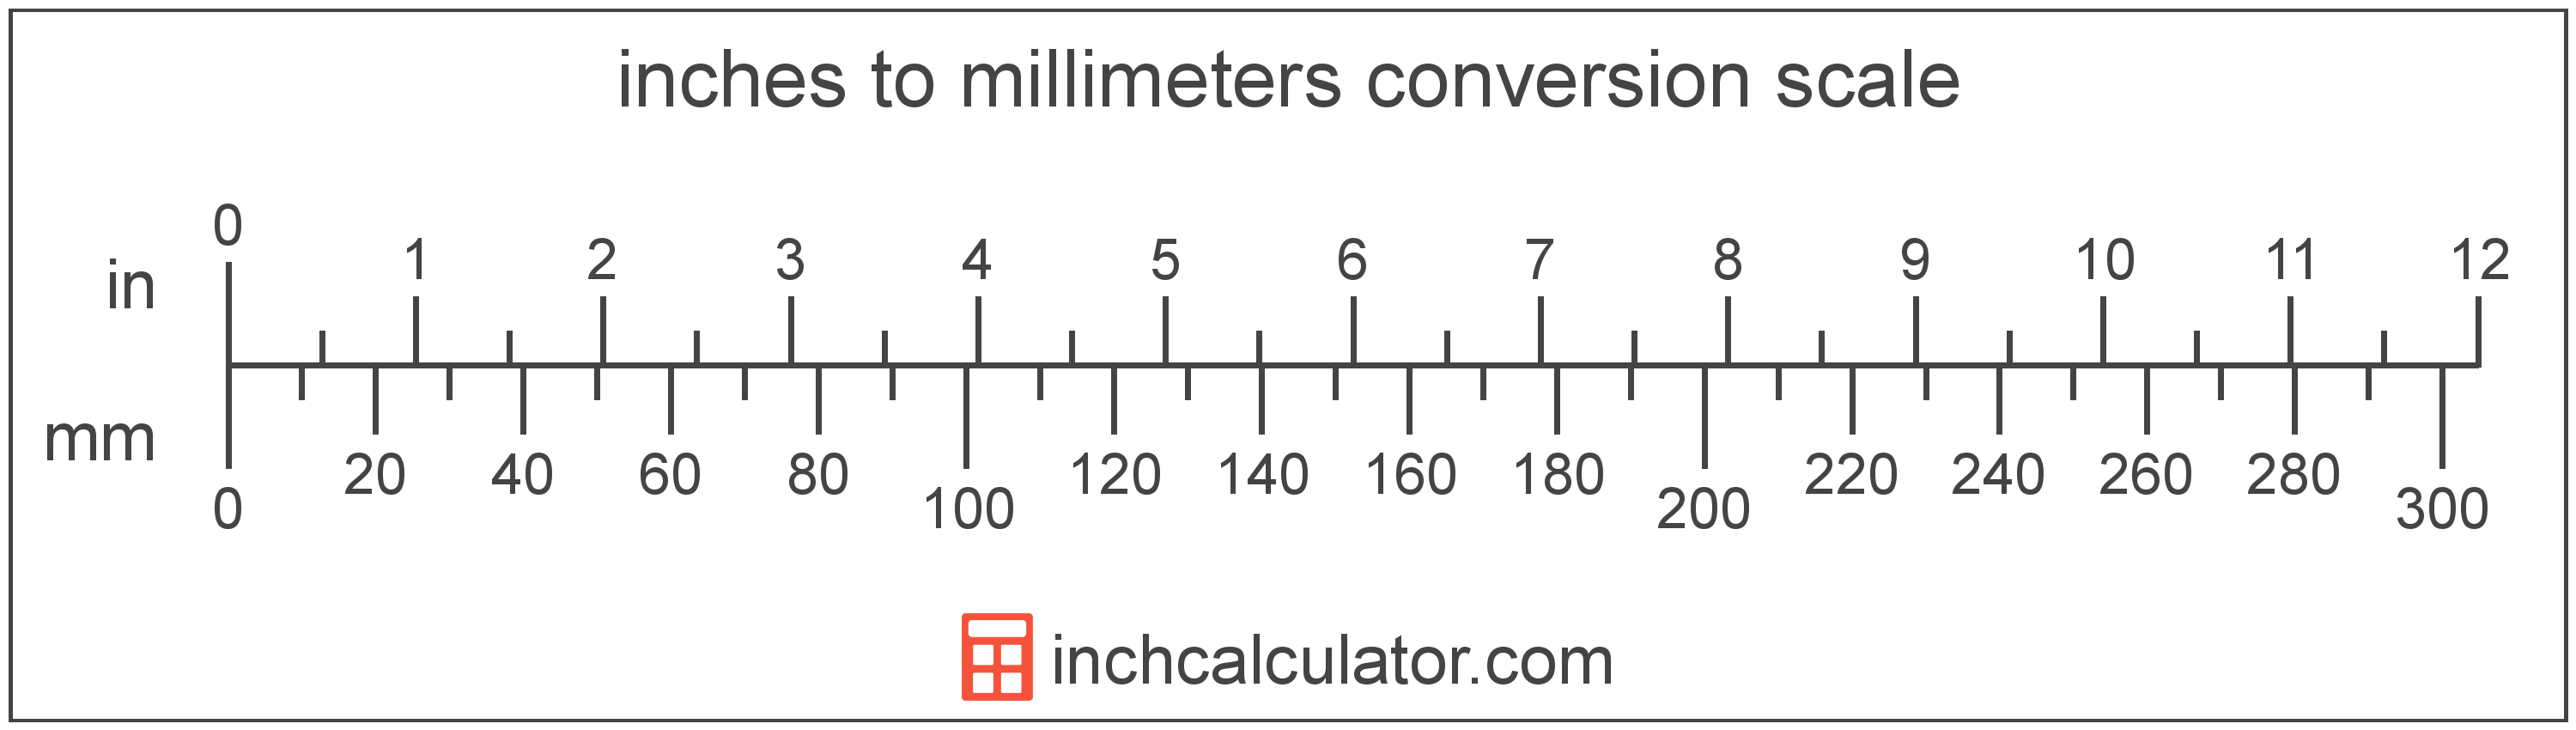 How Many Millimeters Are There In A Meter ~ galaidesigns